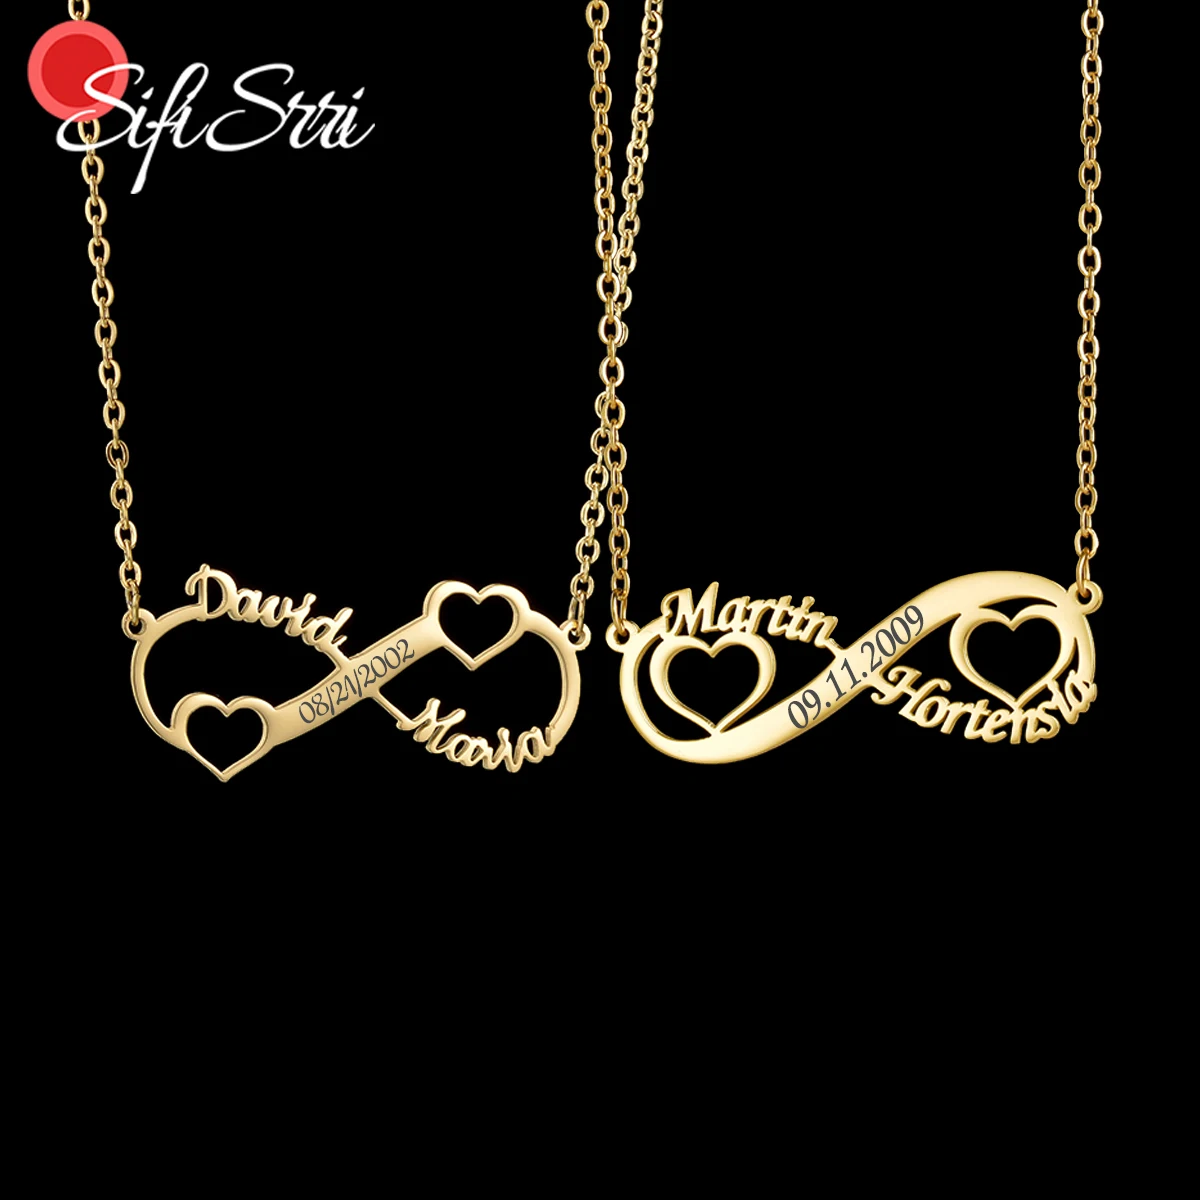 

Sifisrri Personalized Custom Name Necklace for Women Stainless Steel Heart Engrave Date Choker Solid Chains Unisex Jewelry Gift